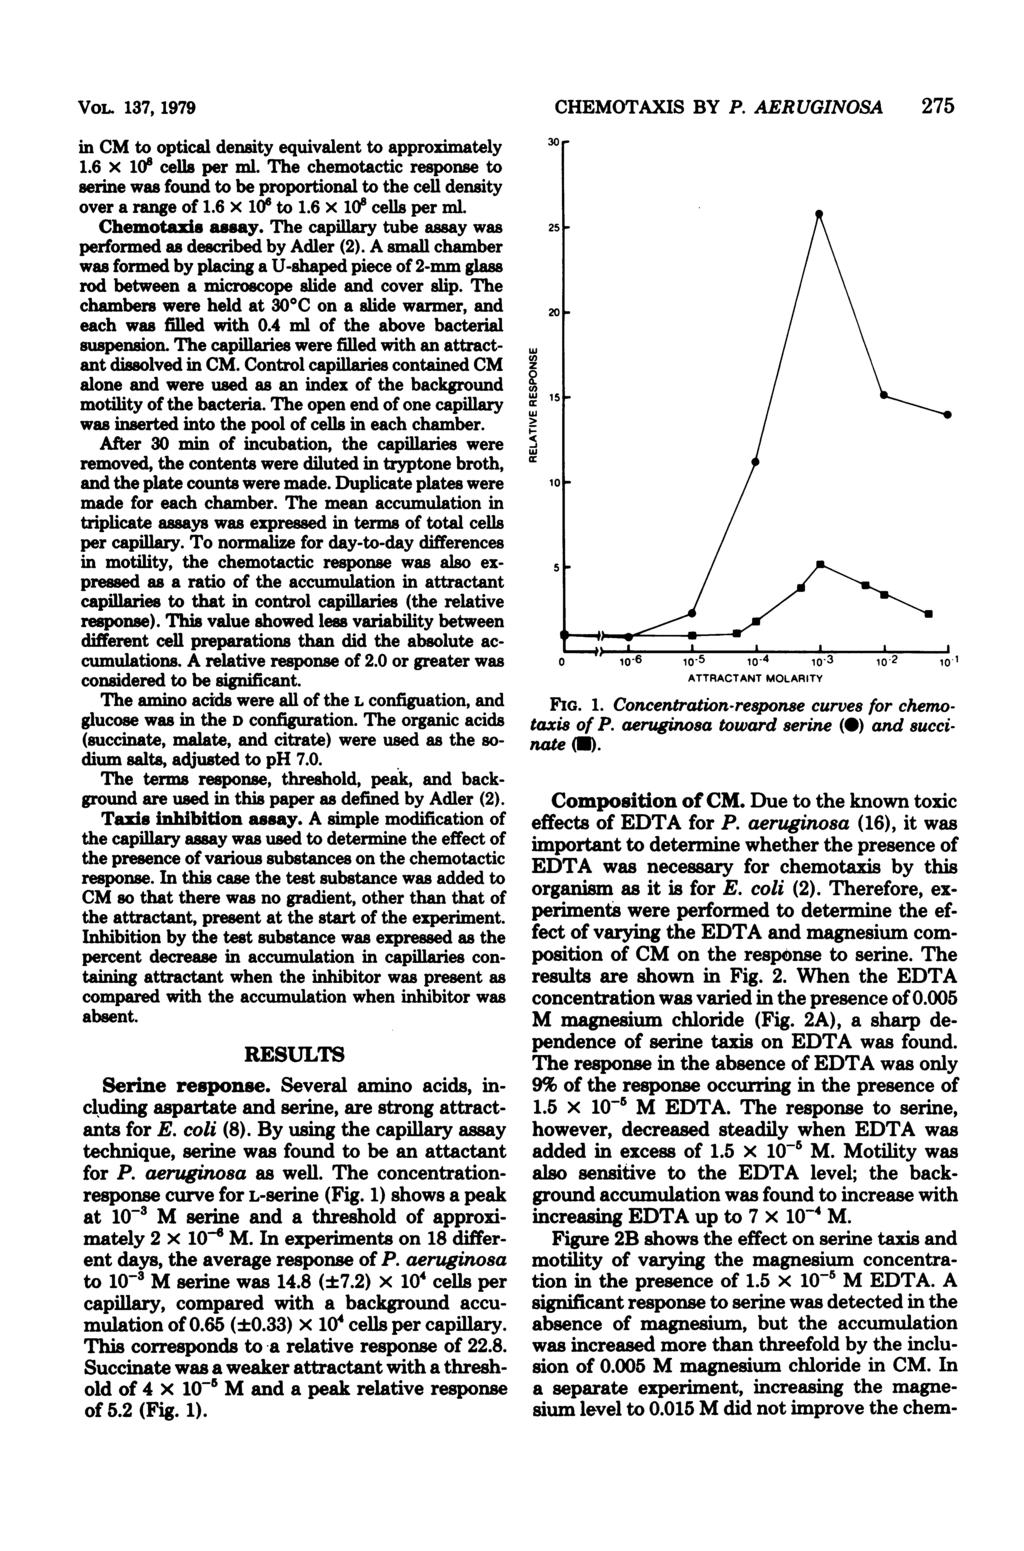 VOL. 137, 1979 in CM to optical density equivalent to approximately 1.6 x 106 cells per ml. The chemotactic response to serine was found to be proportional to the cell density over a range of 1.